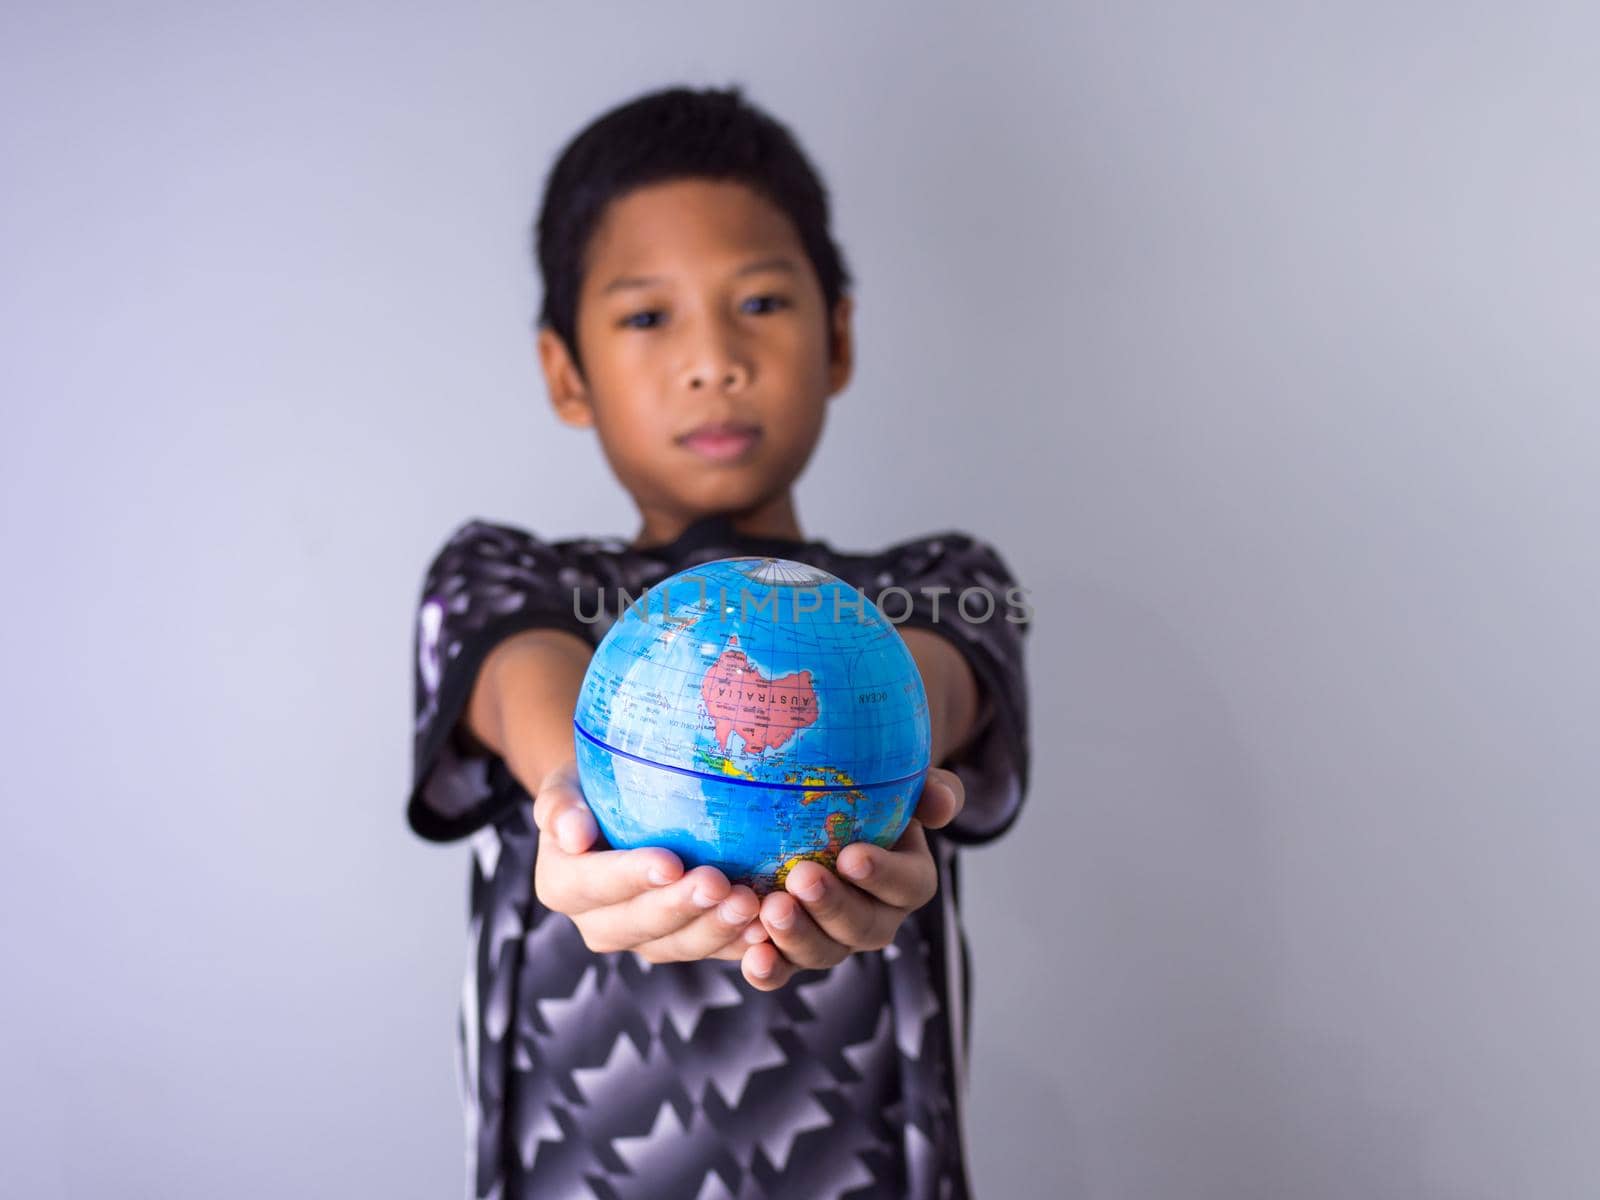 boy holding a globe stand out in front Show the power of the new generation to continue to develop our world.